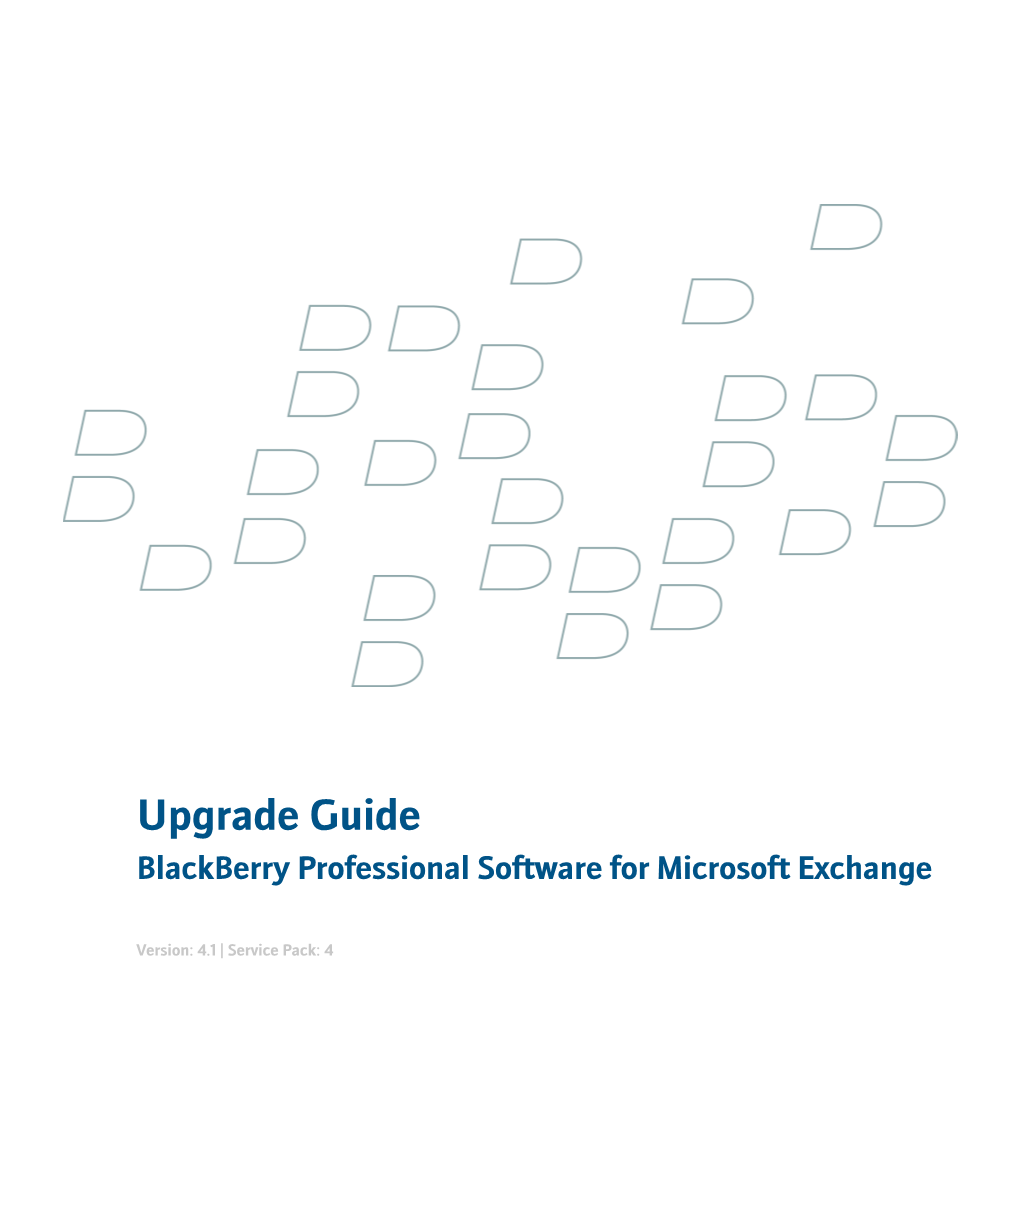 Blackberry Professional Software for Microsoft Exchange